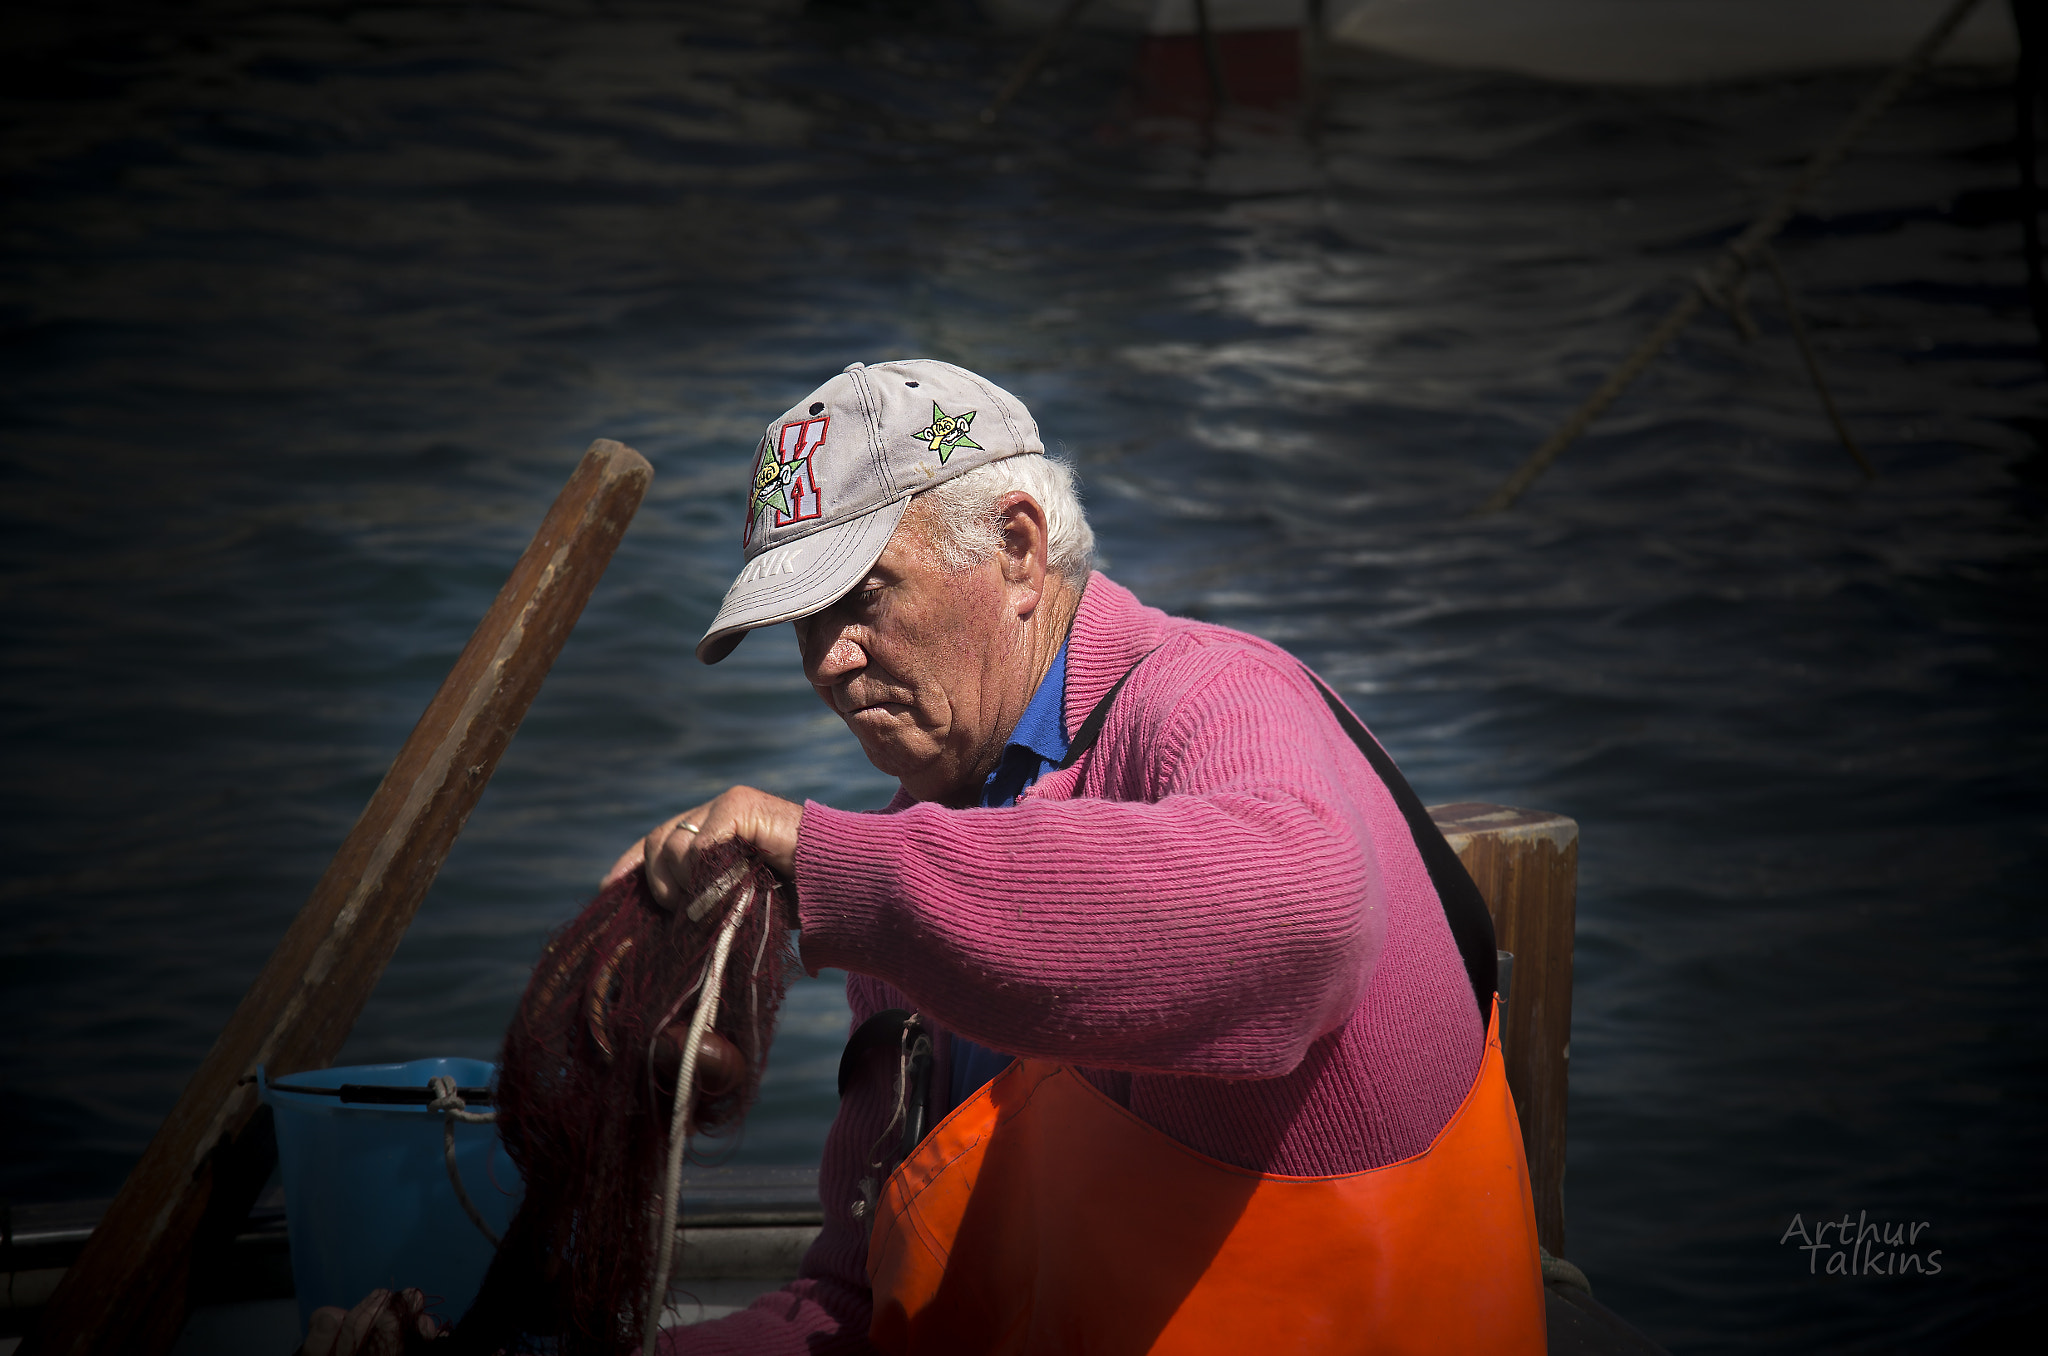 Pentax K-5 sample photo. Old man and the sea...a fisherman's story. photography